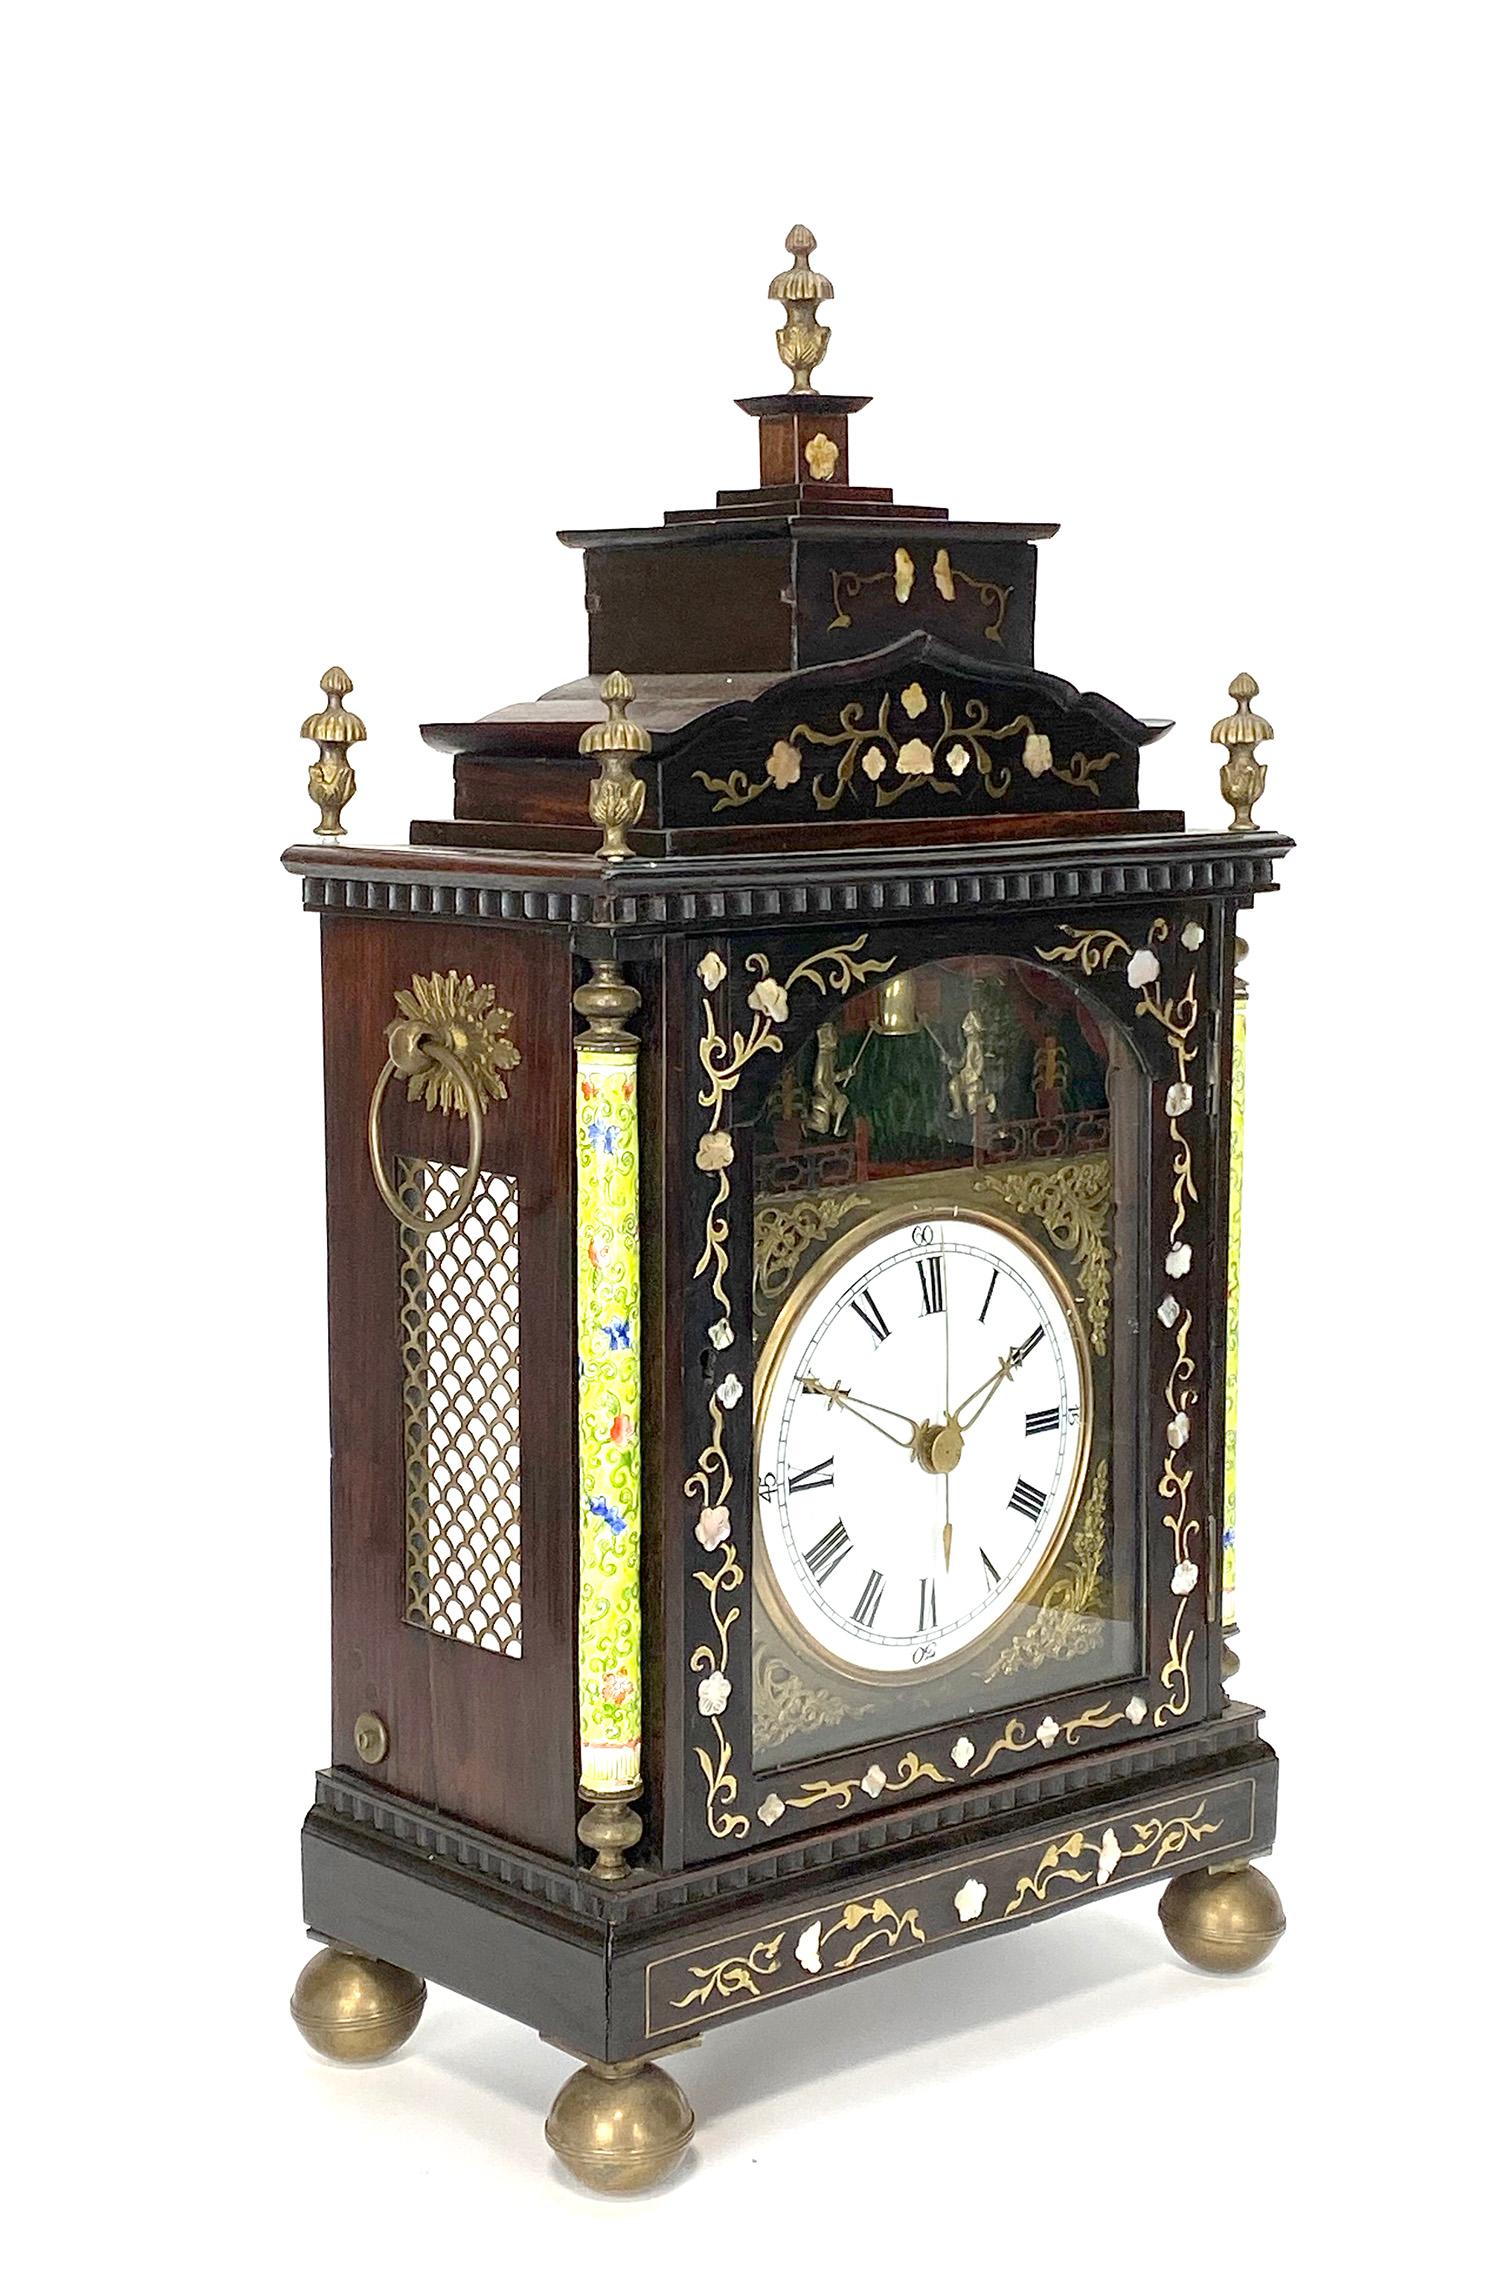 Here we are offering a rare Chinese rosewood bracket clock with enamel column on each side. Front case is inlaid with mother of pearl and nearly in perfect condition. 5 brass finials located on the top of the case. This clock has an 8 day fusee